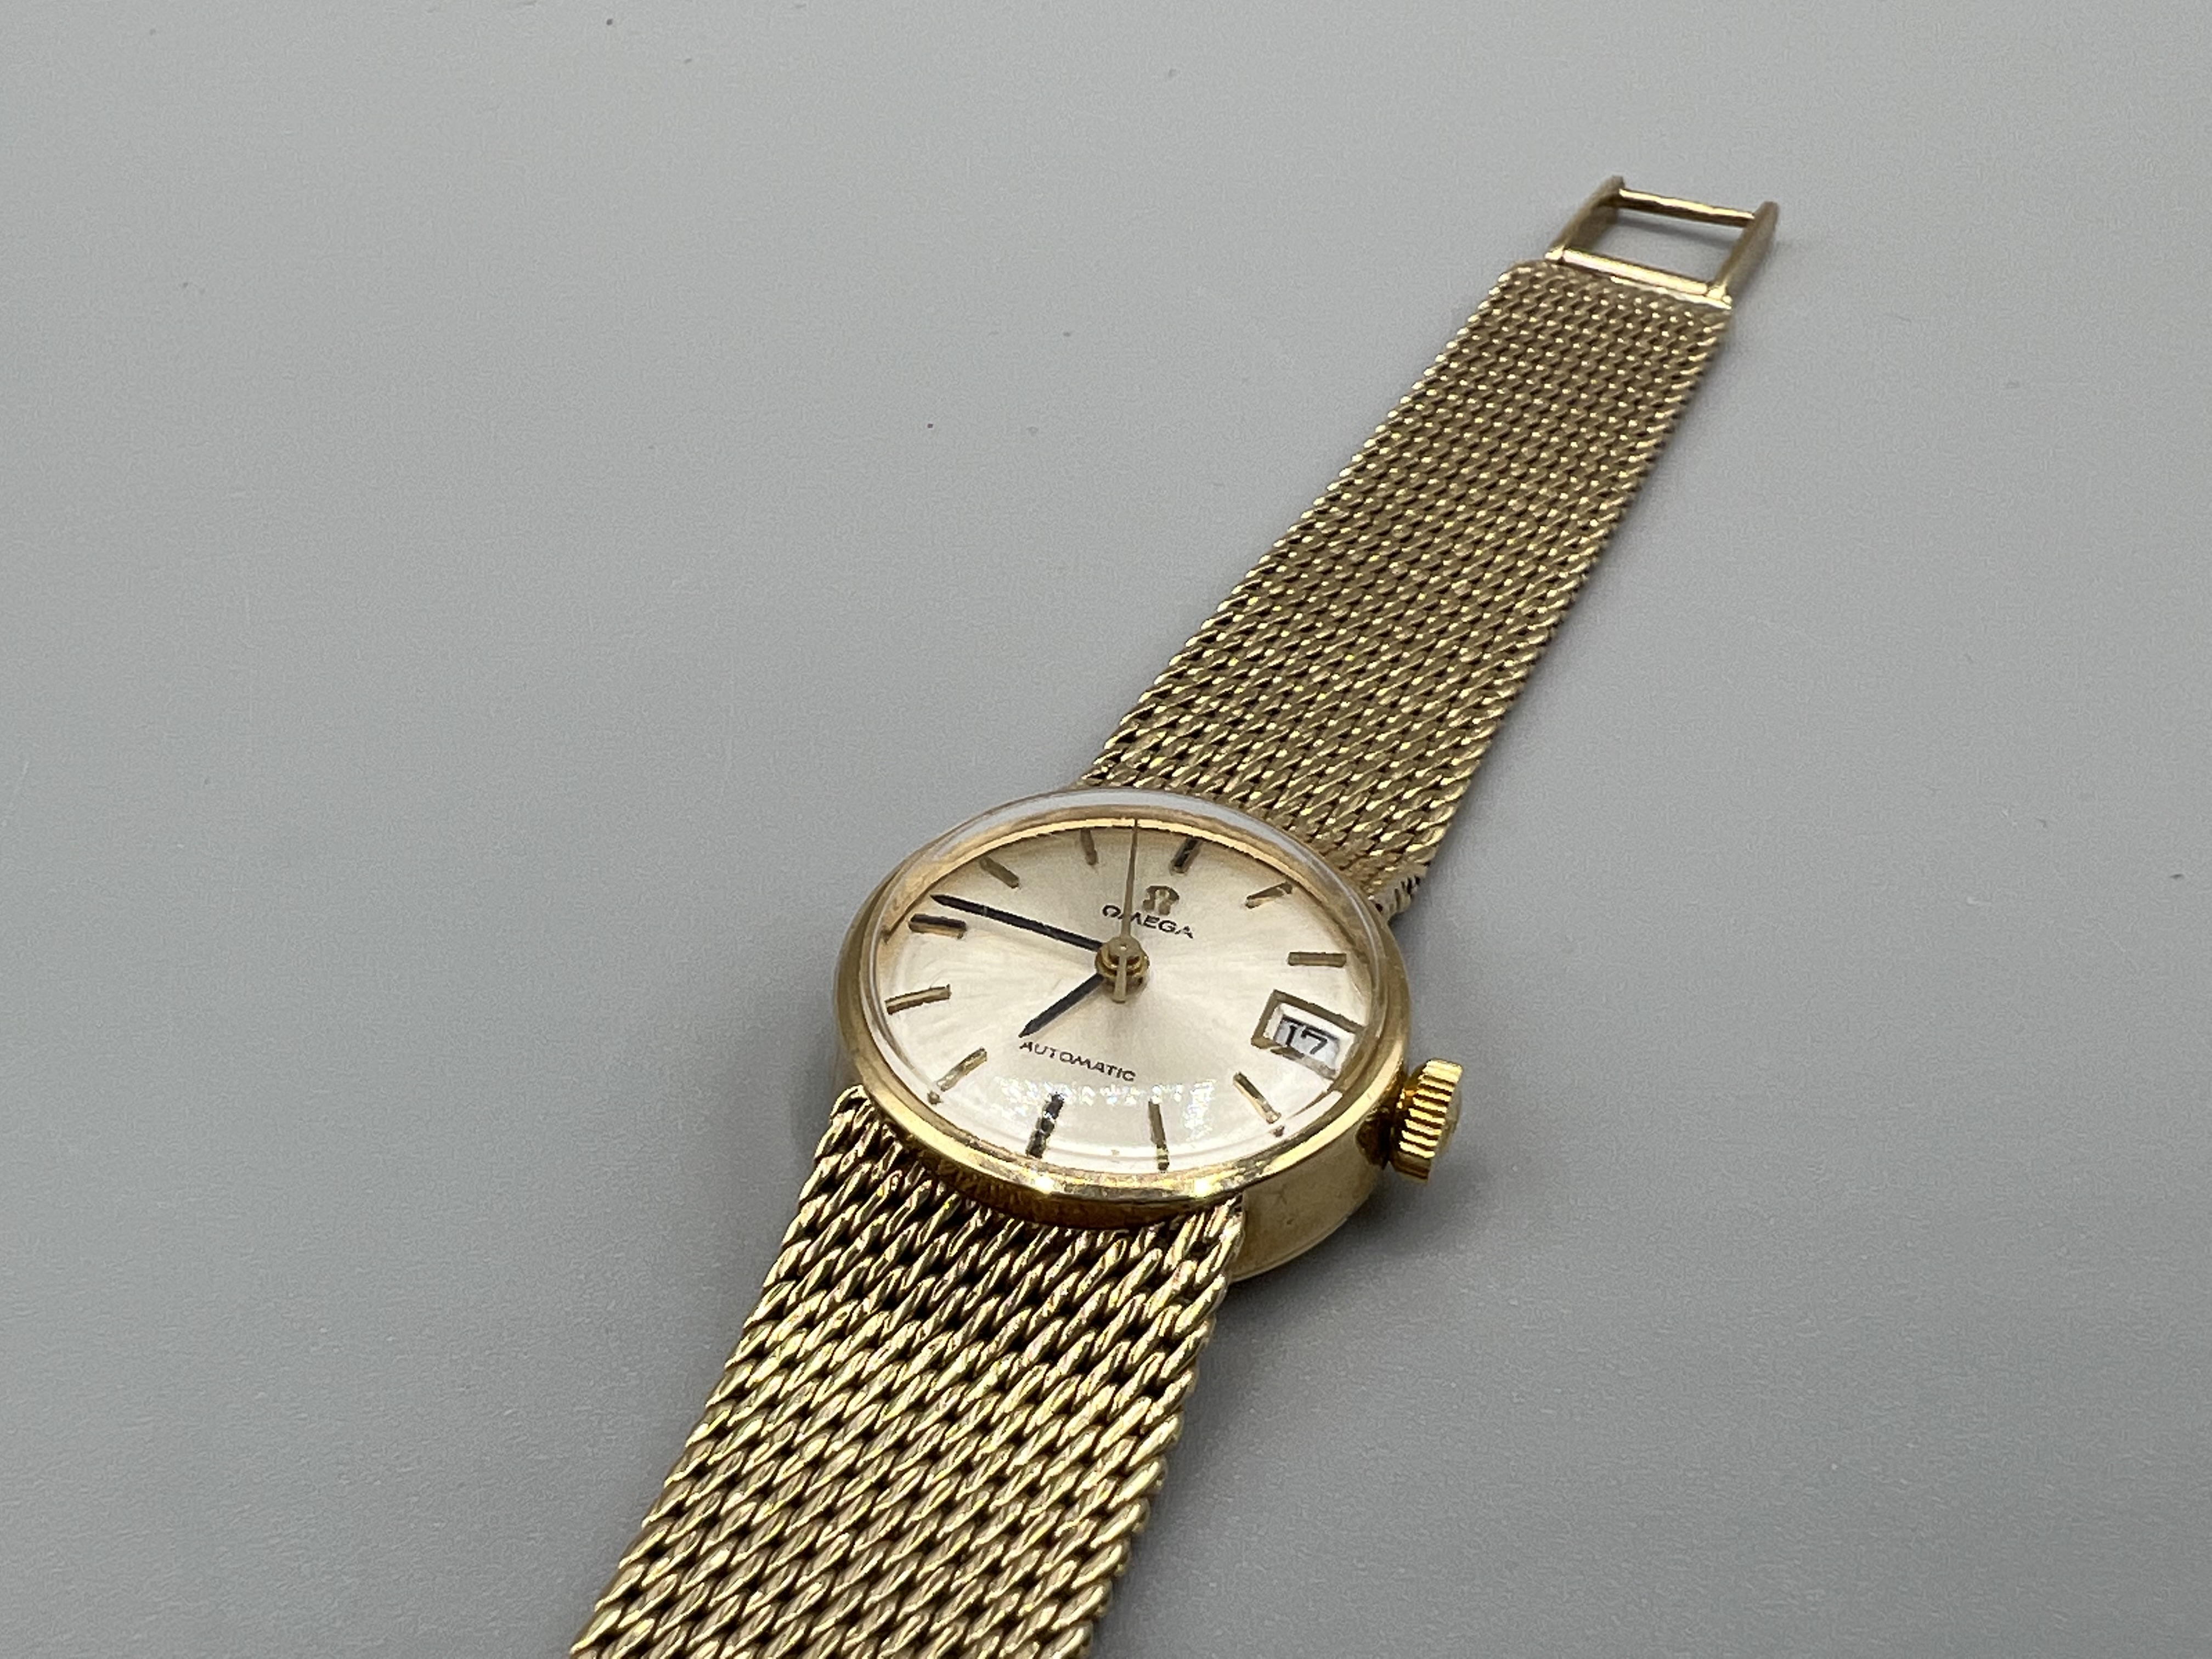 Vintage 9ct Gold Automatic Omega Watch with Gold Strap 16cm in length - Full working order & - Image 2 of 2